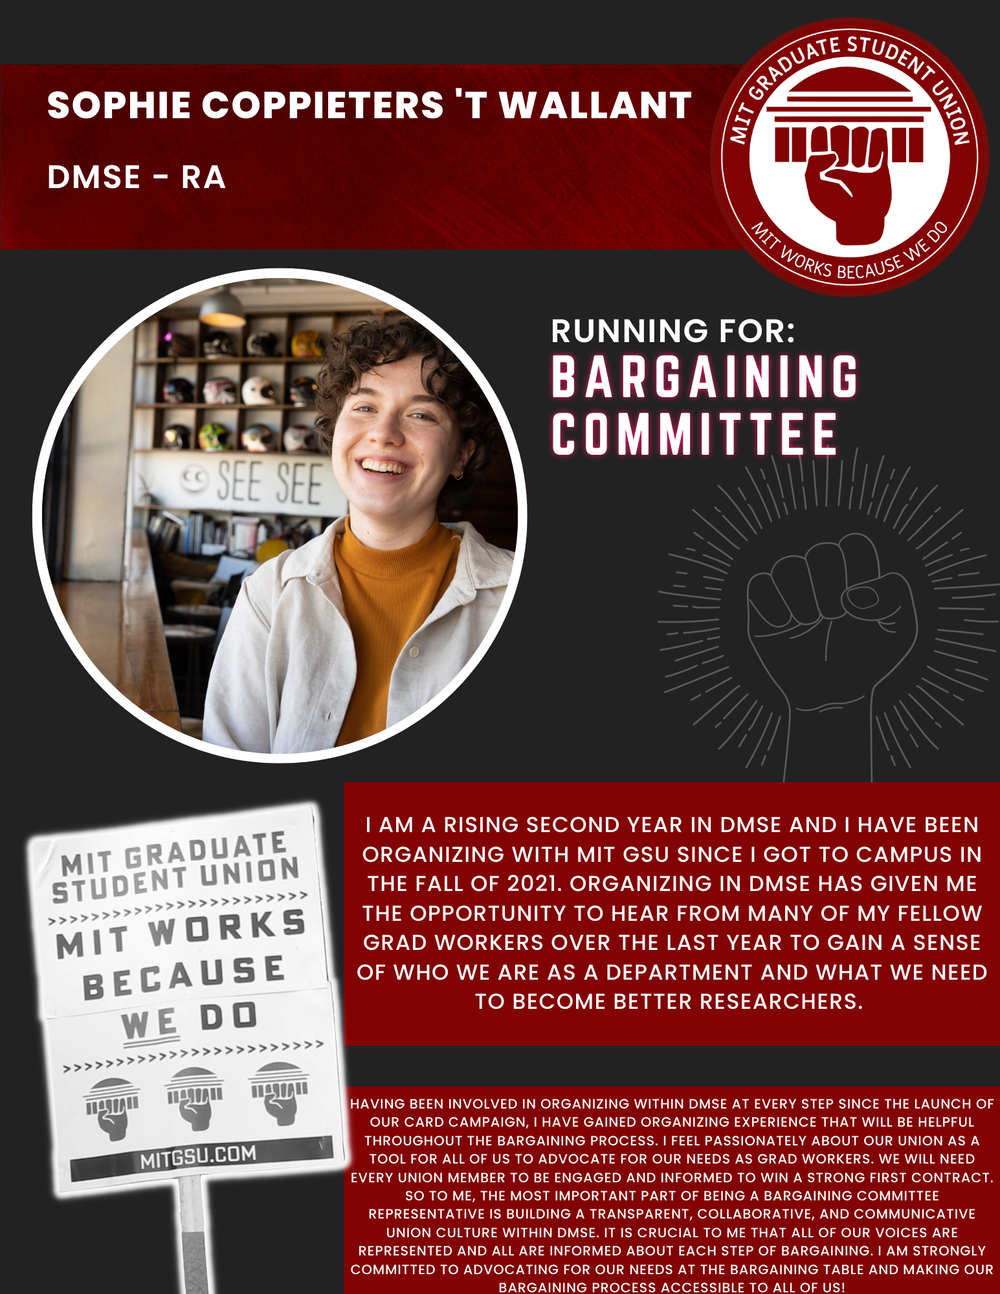  SOPHIE COPPIETERS 'T WALLANT DMSE - RA   RUNNING FOR: Bargaining Committee  I AM A RISING SECOND YEAR IN DMSE AND I HAVE BEEN ORGANIZING WITH MIT GSU SINCE I GOT TO CAMPUS IN THE FALL OF 2021. ORGANIZING IN DMSE HAS GIVEN ME THE OPPORTUNITY TO HEAR 